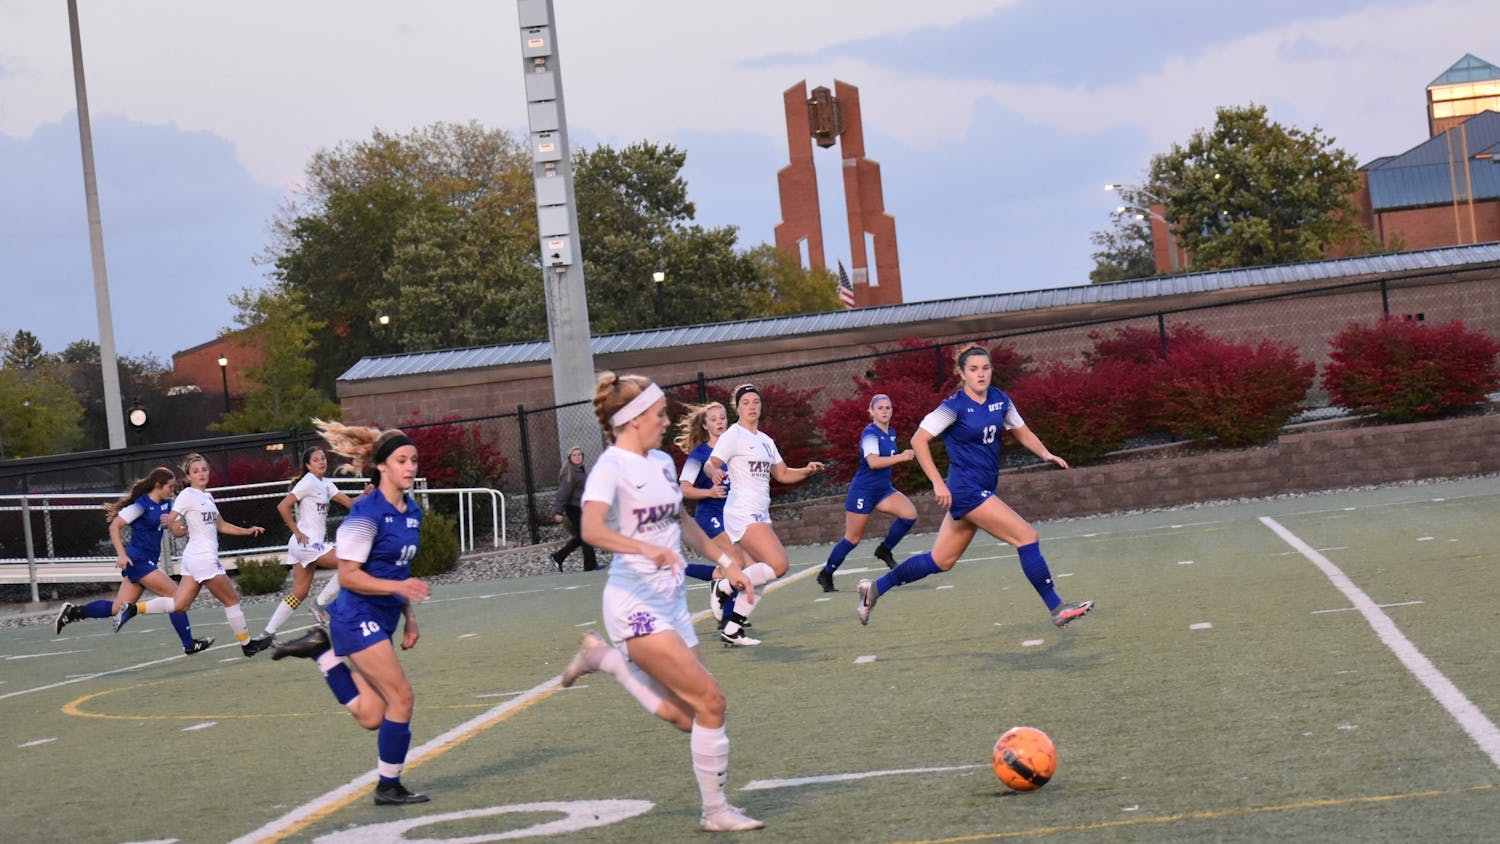 Taylor women’s soccer found themselves dealing with a tough loss last Saturday